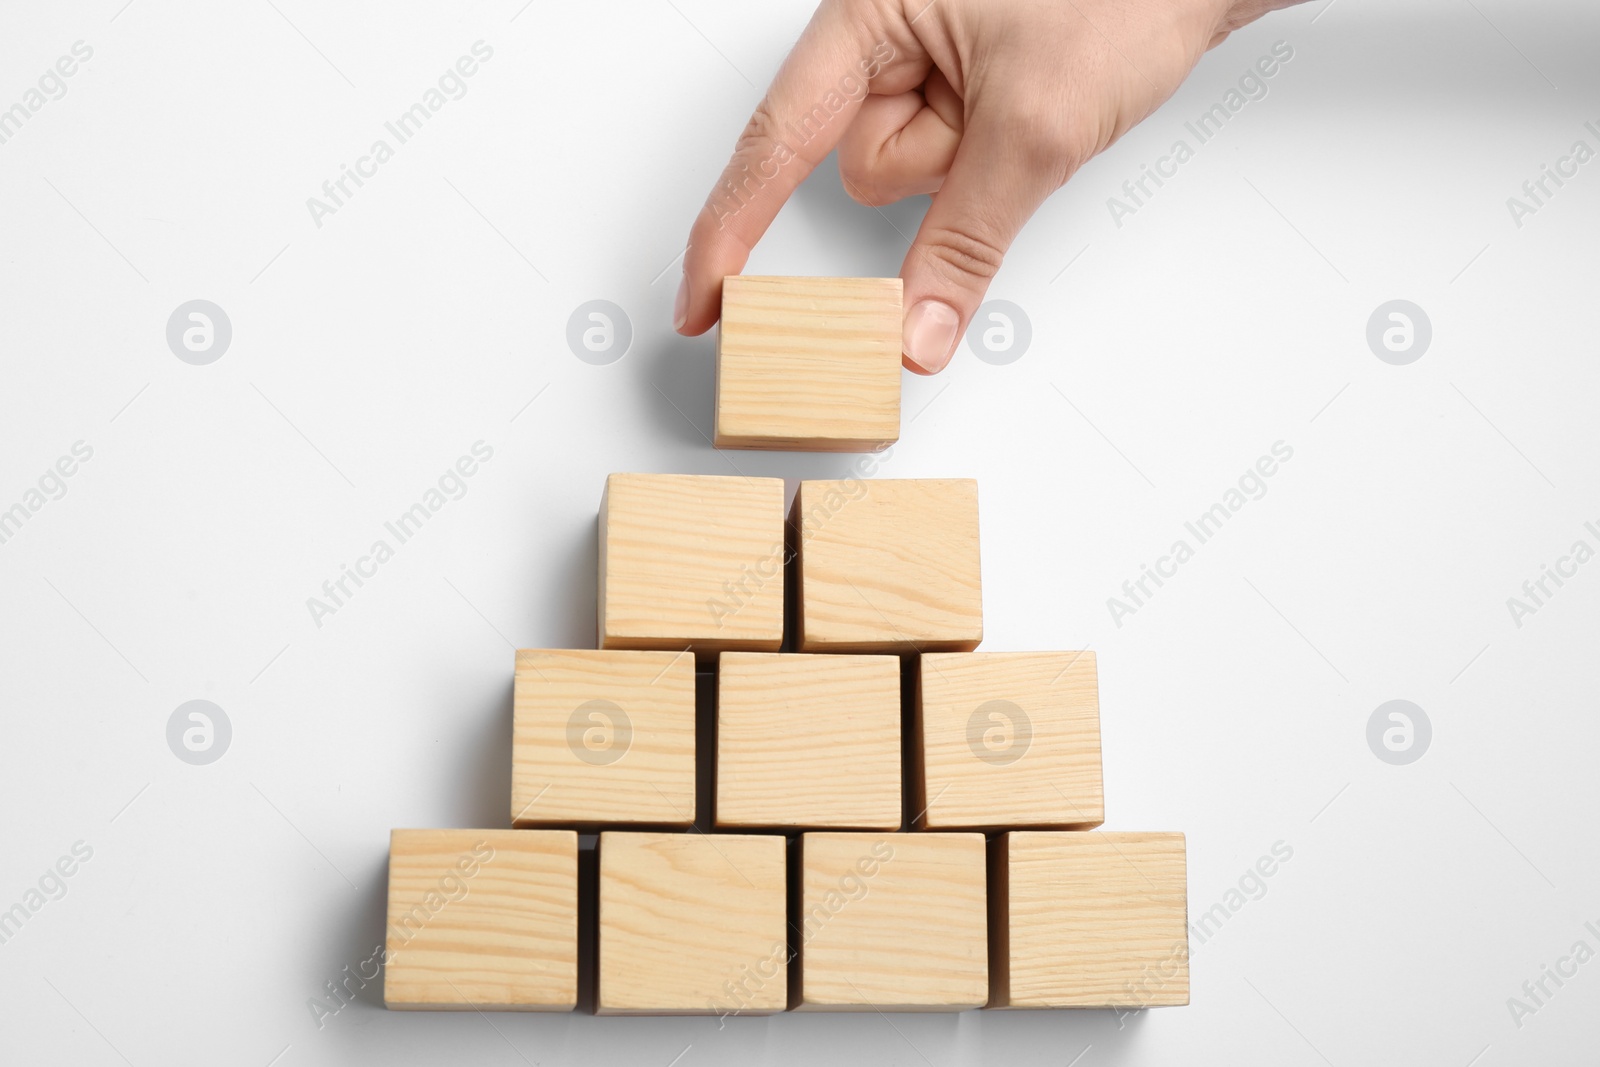 Photo of Closeup view of woman building pyramid with wooden cubes on white background, top view. Career promotion concept